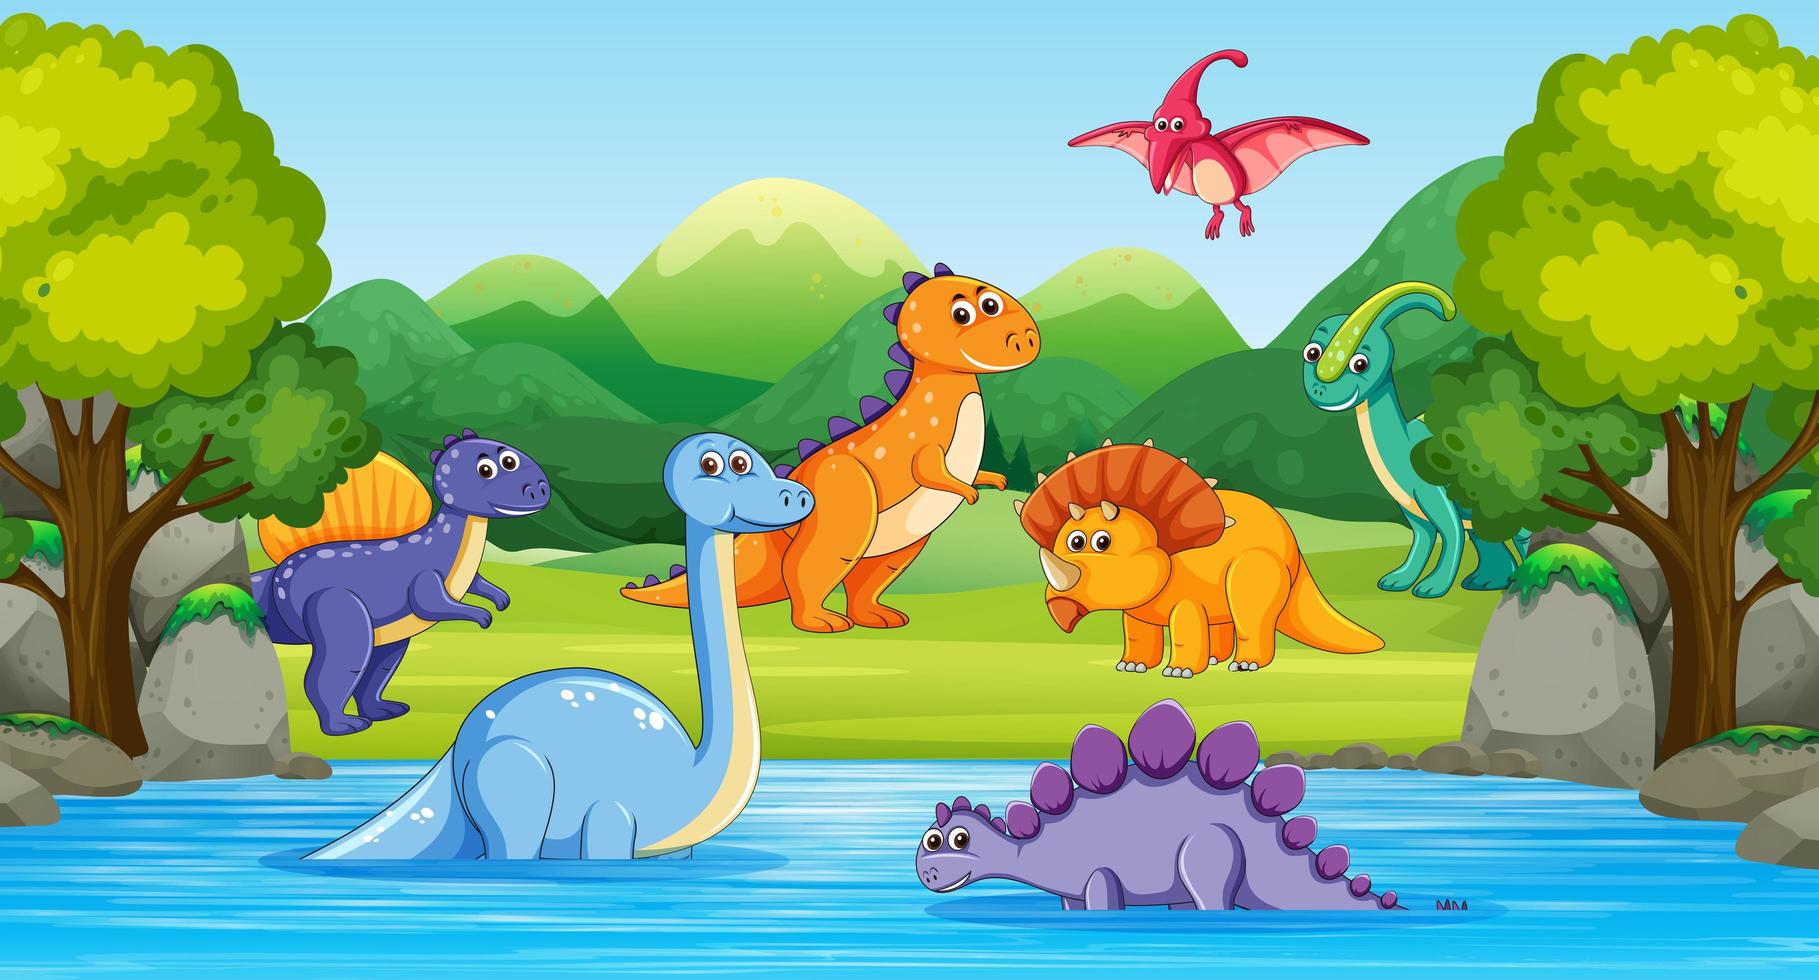 Dinosaurs in wood scene with river vector